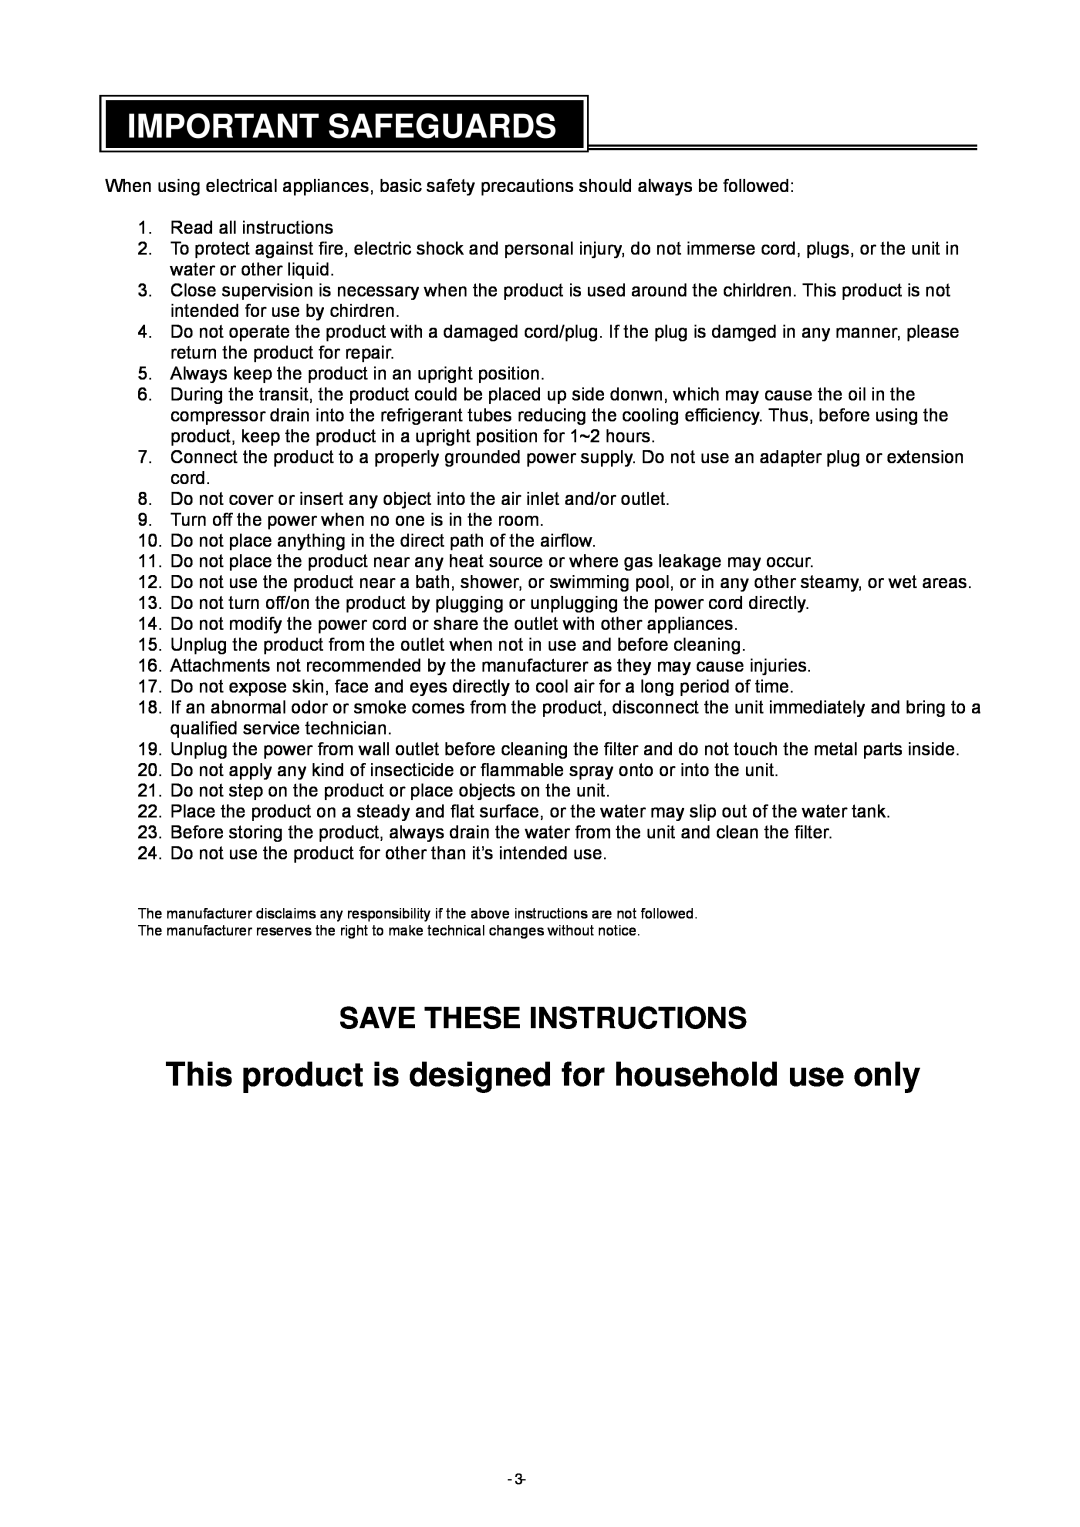 Brada Appliances YPM-06C Important Safeguards, Save These Instructions, This product is designed for household use only 